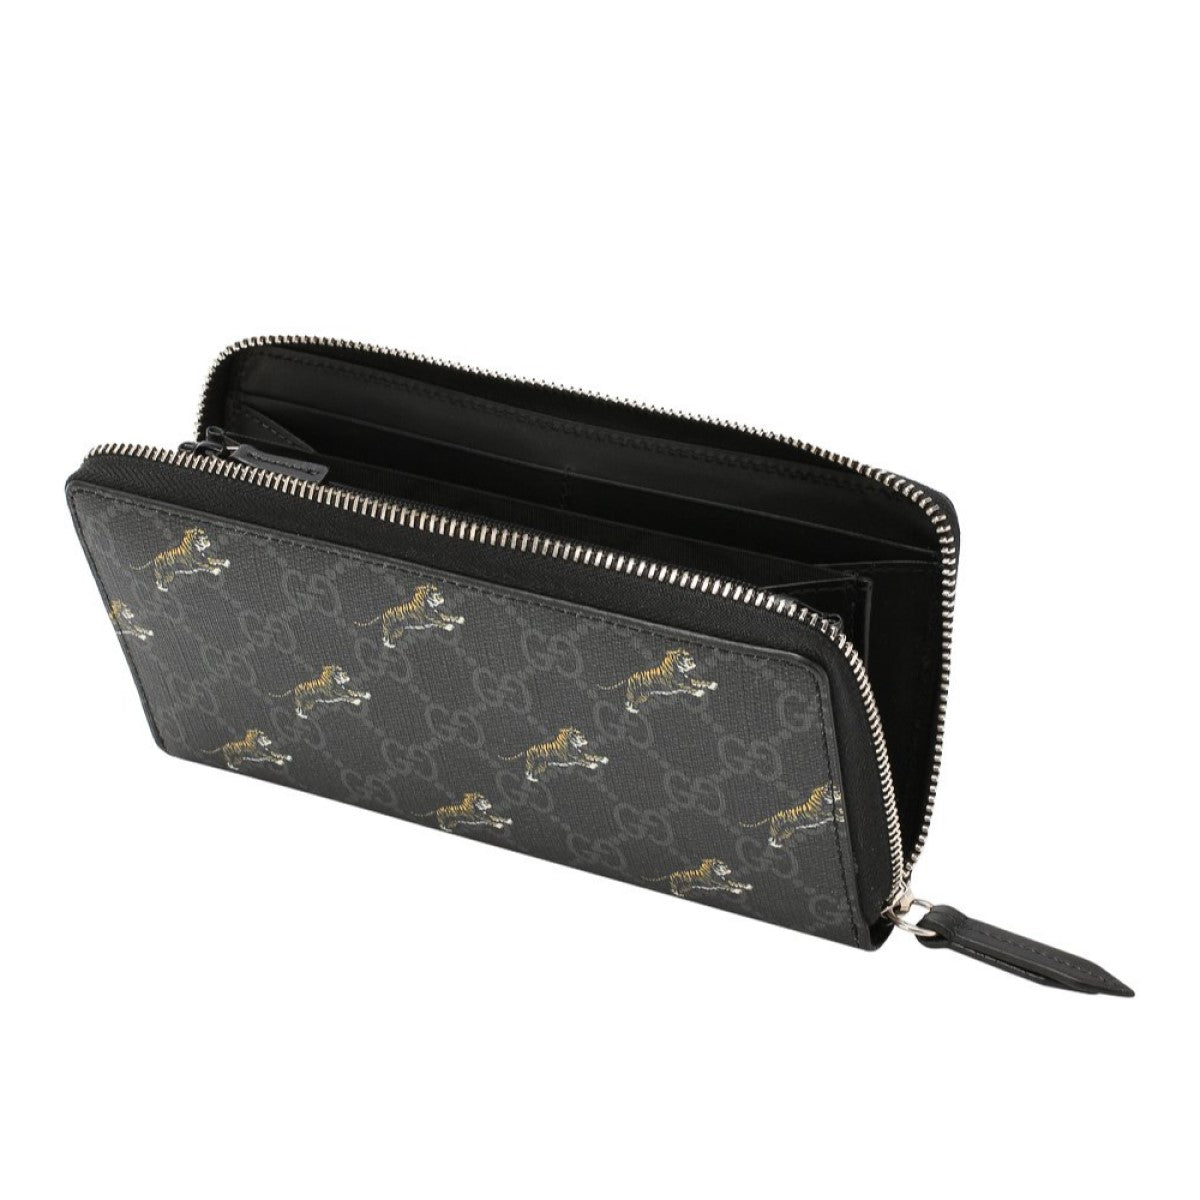 Gucci Grey GG Supreme Canvas Tiger Print Zip Around Wallet 575135 at_Queen_Bee_of_Beverly_Hills